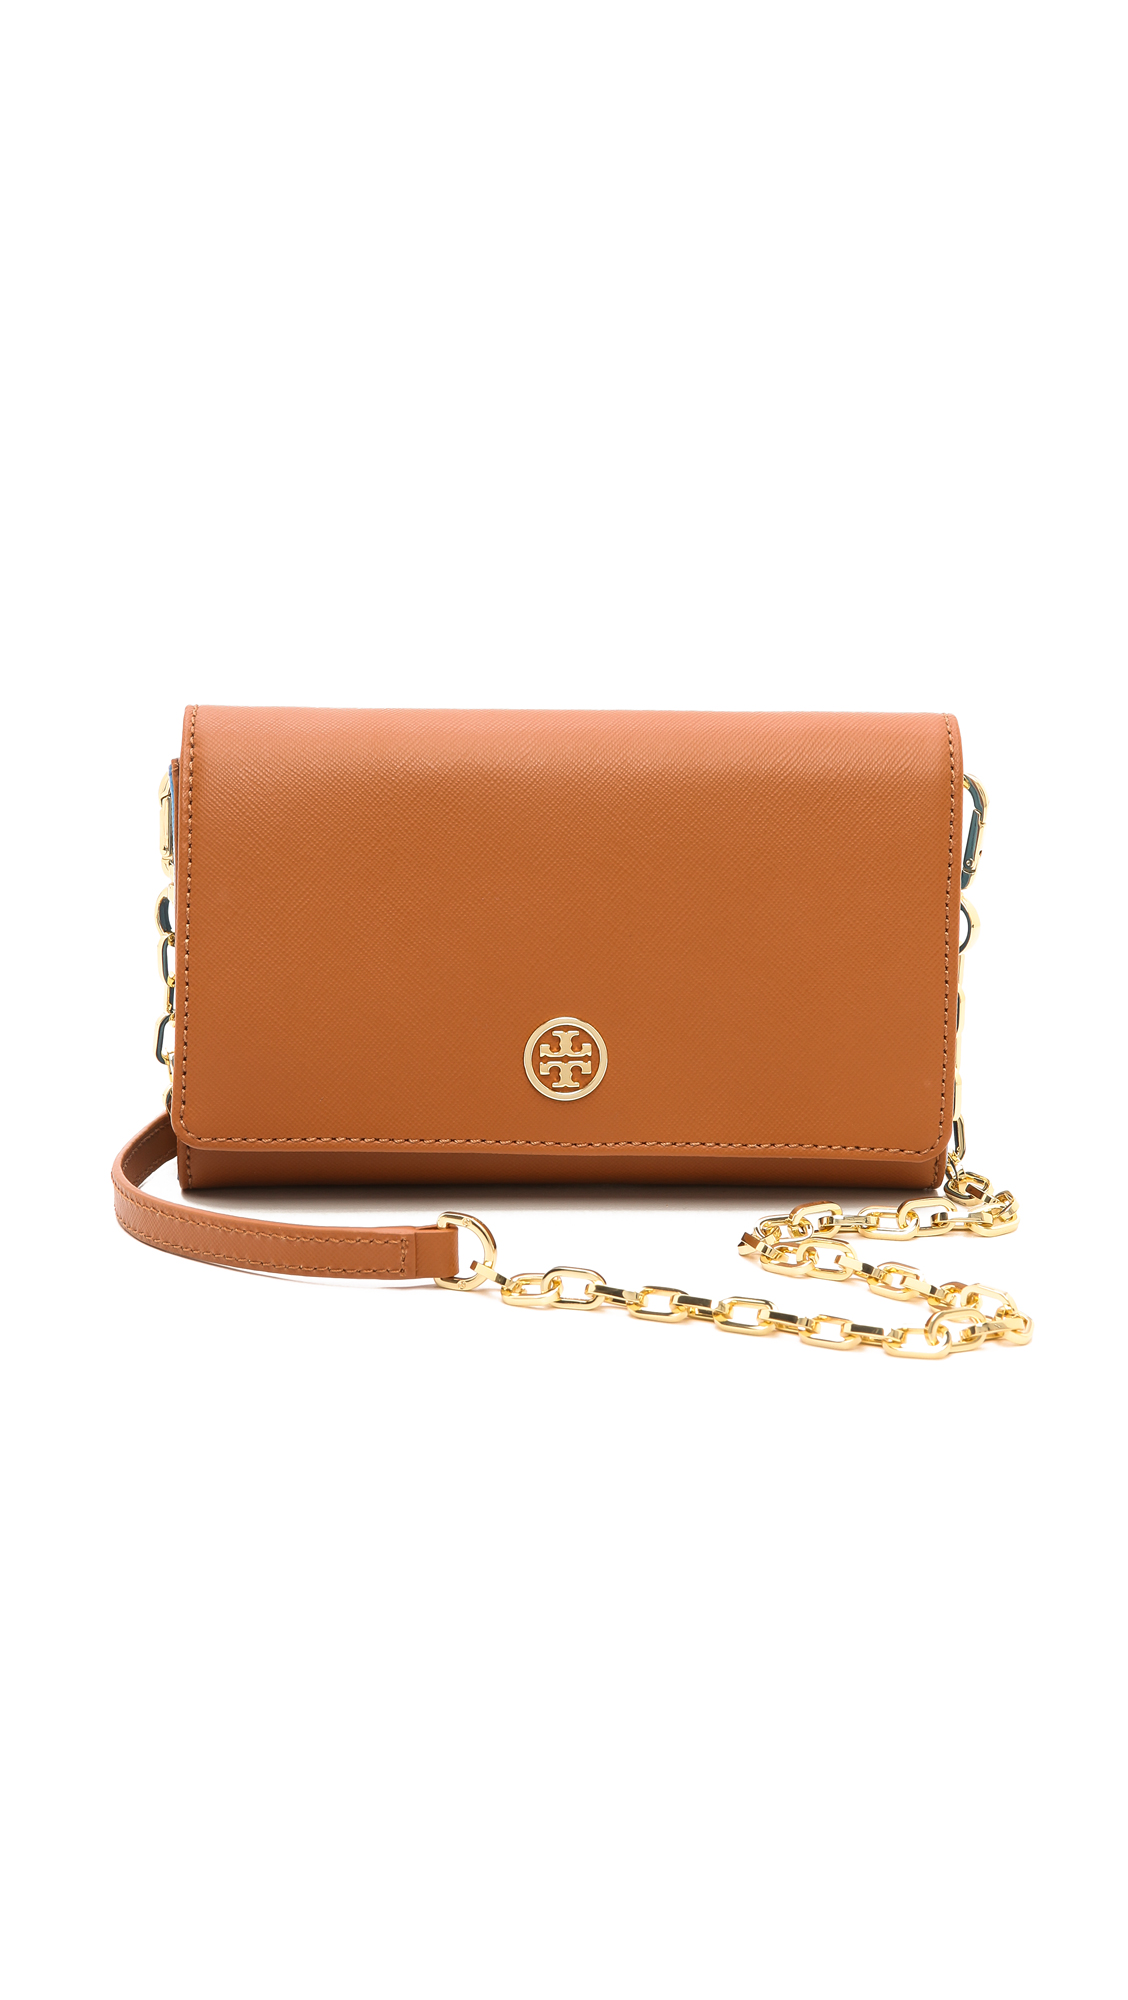 Tory Burch Robinson Wallet On A Chain in Brown - Lyst